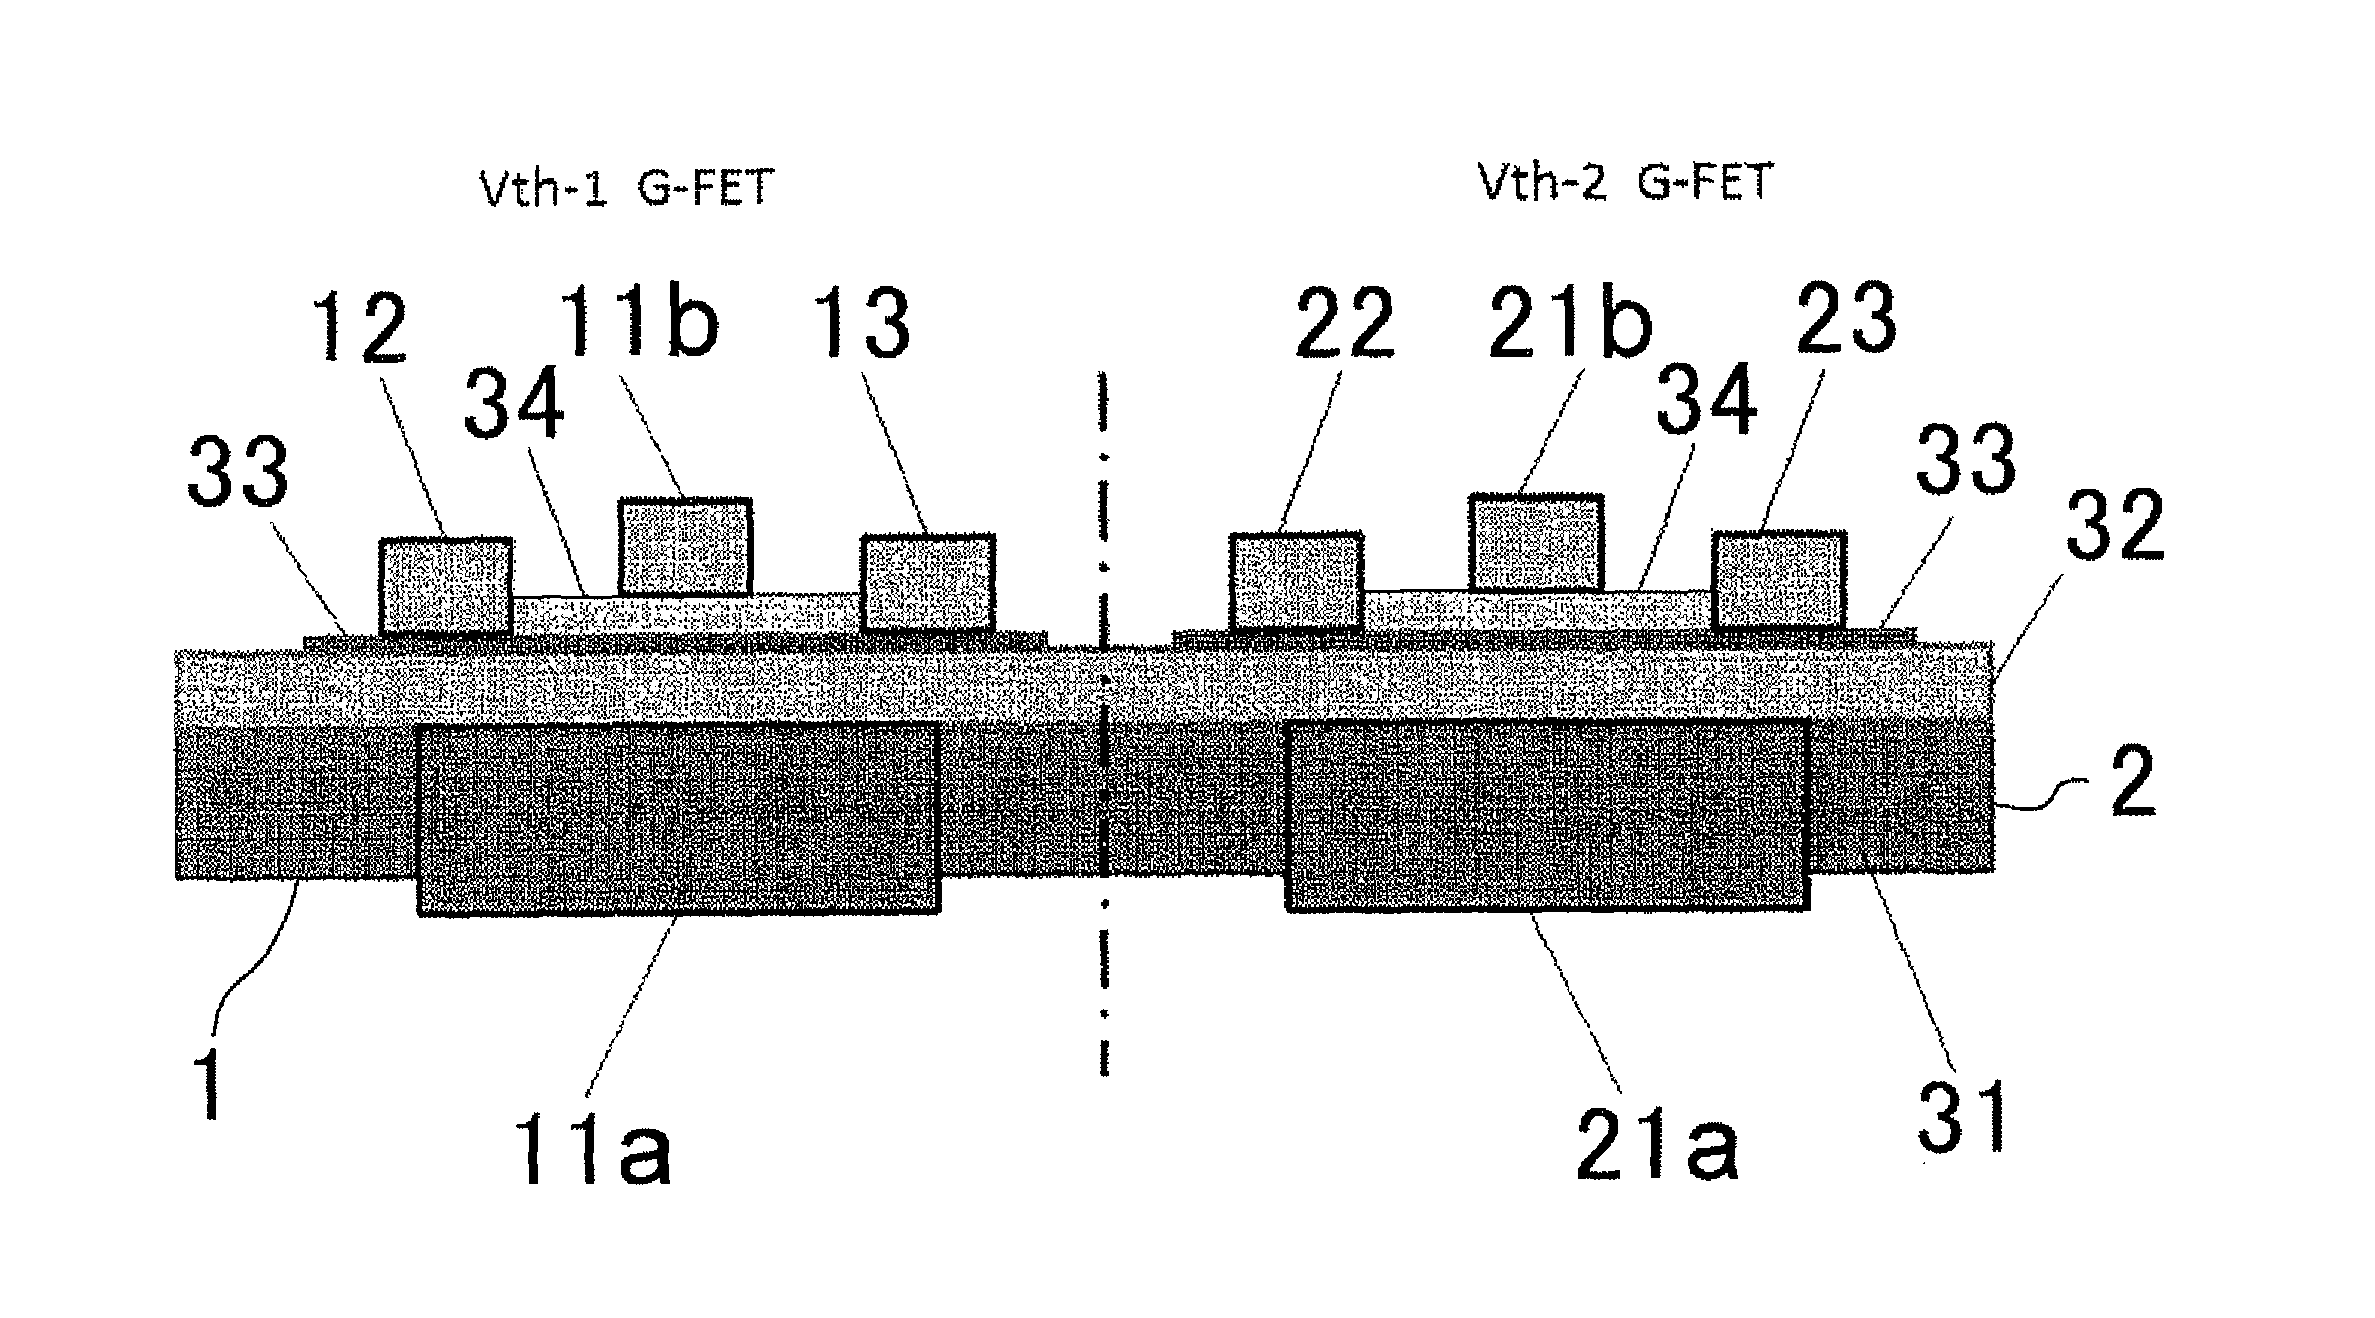 Complementary logic gate device